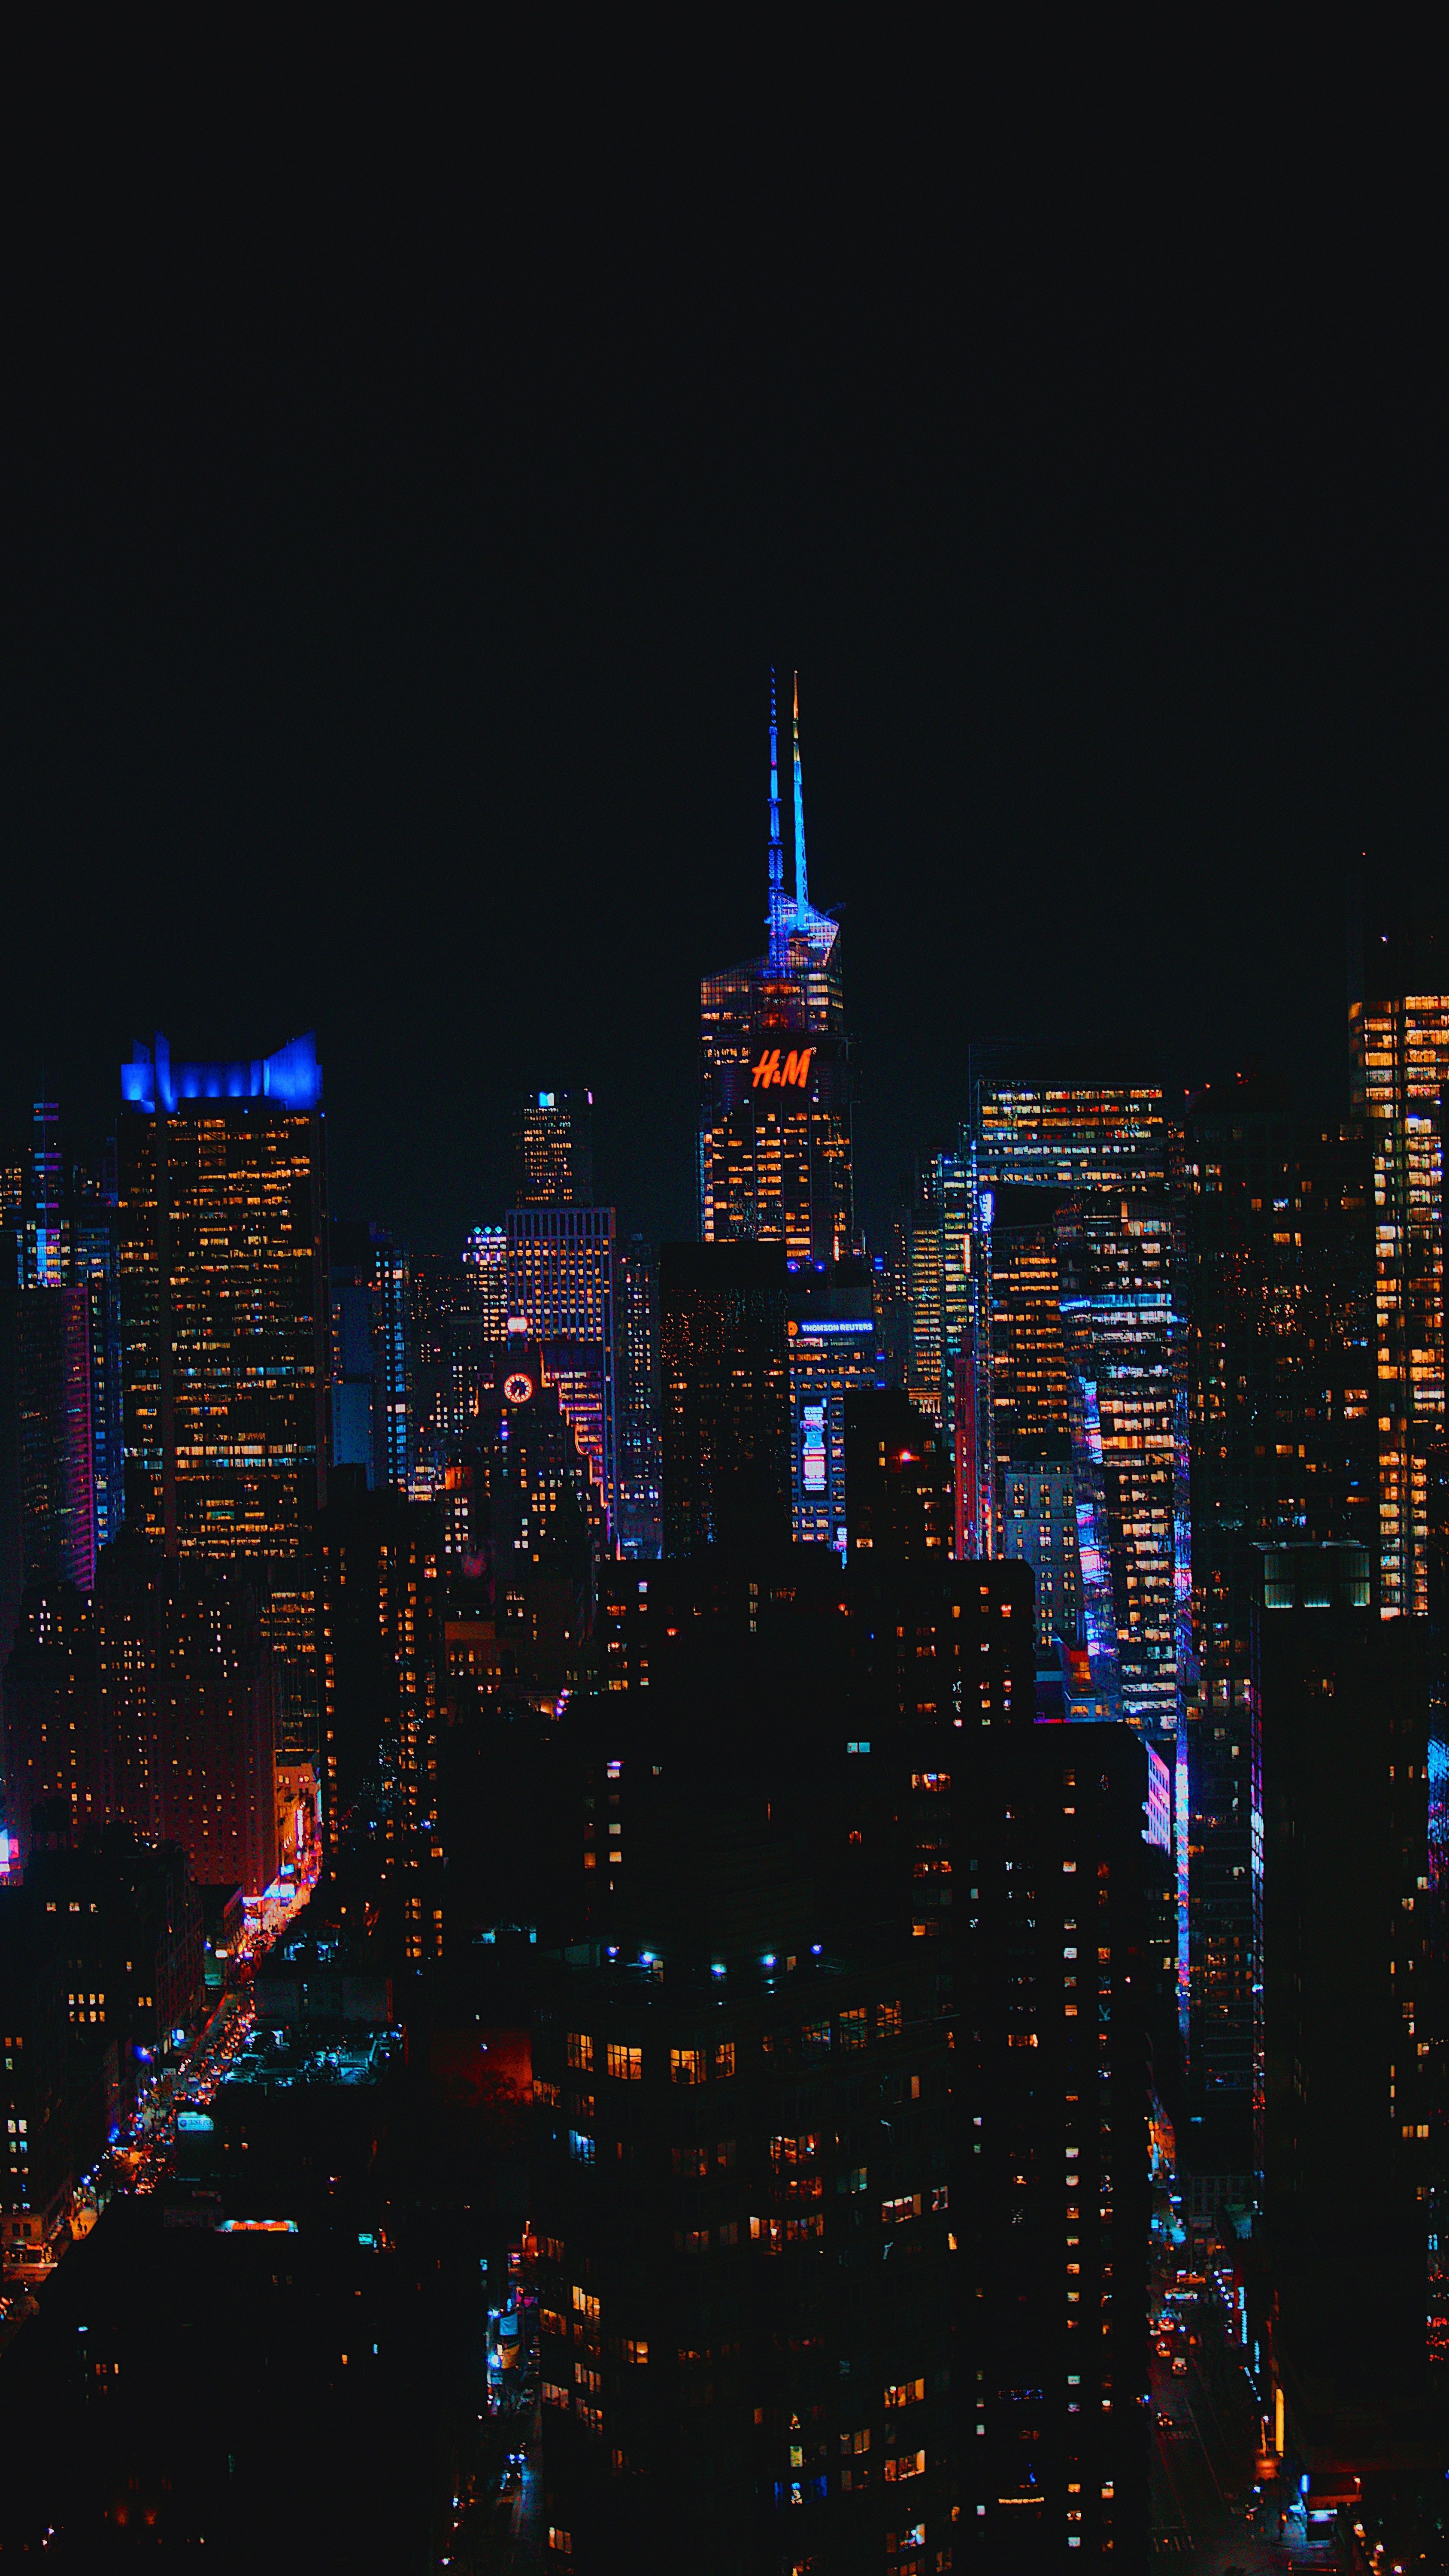 A cityscape at night with skyscrapers lit up in blue, white, and purple. - Skyline, New York